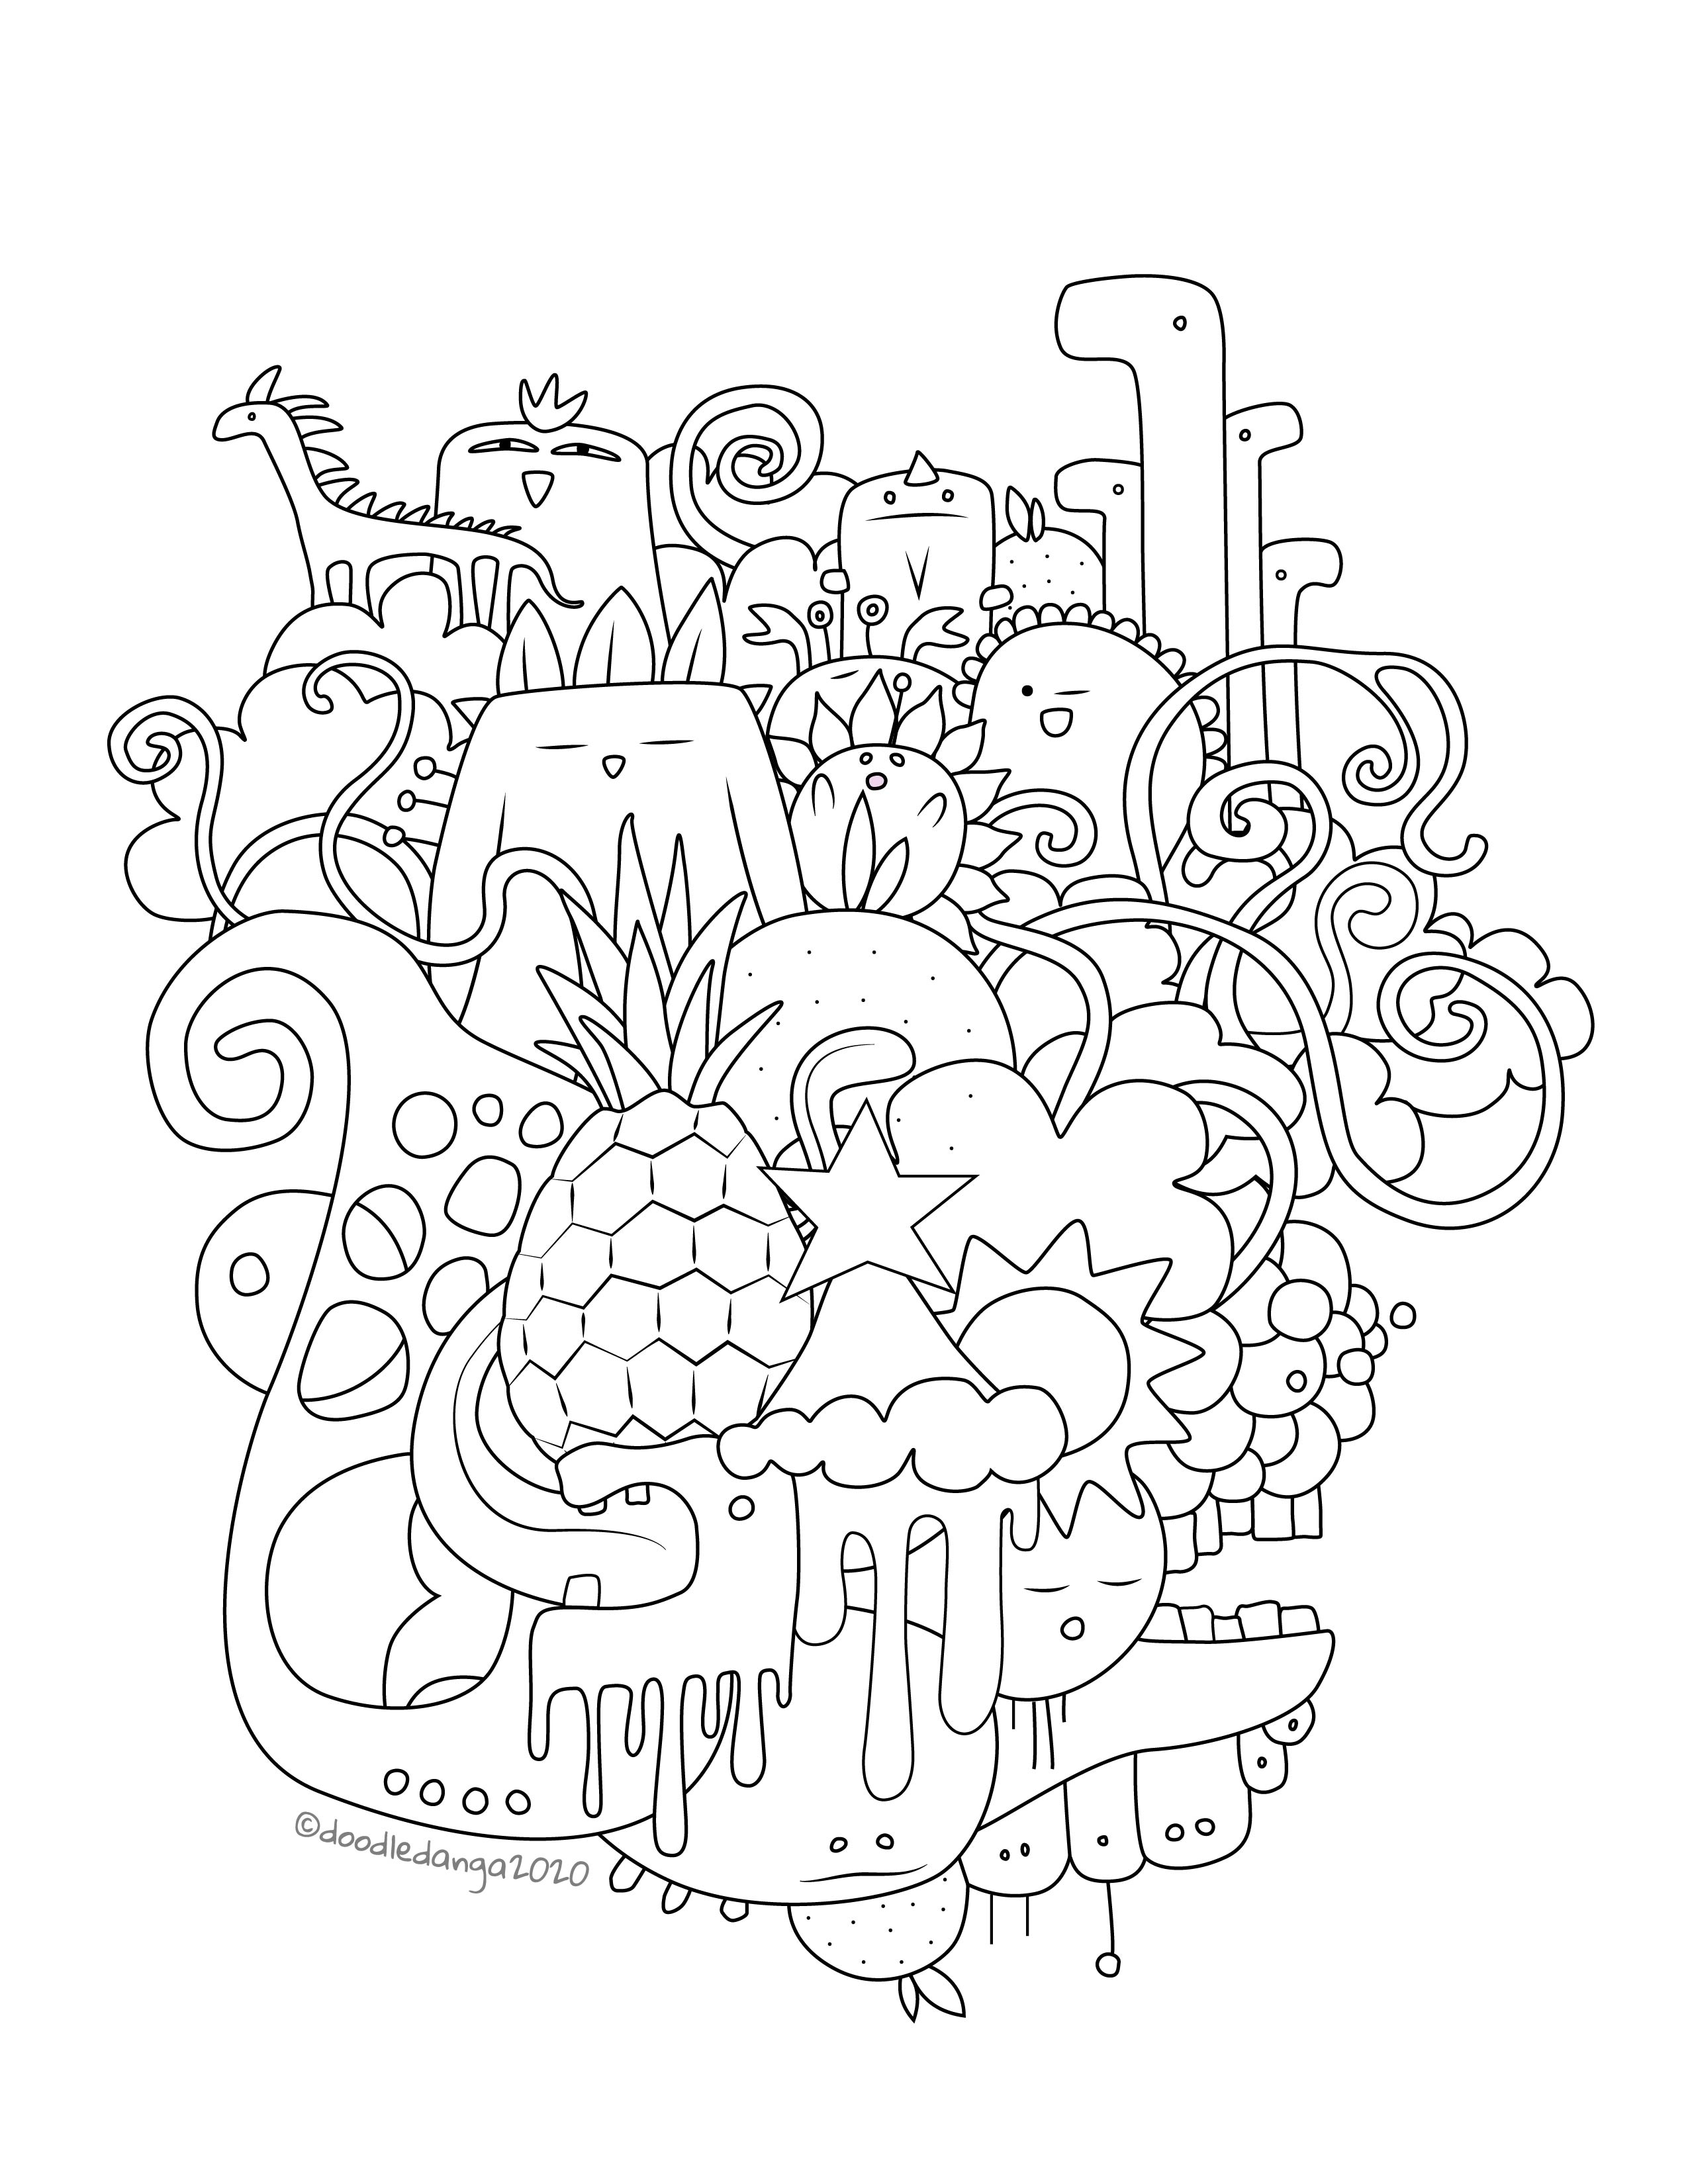 Doodle-Land_Coloring_ Page.jpg